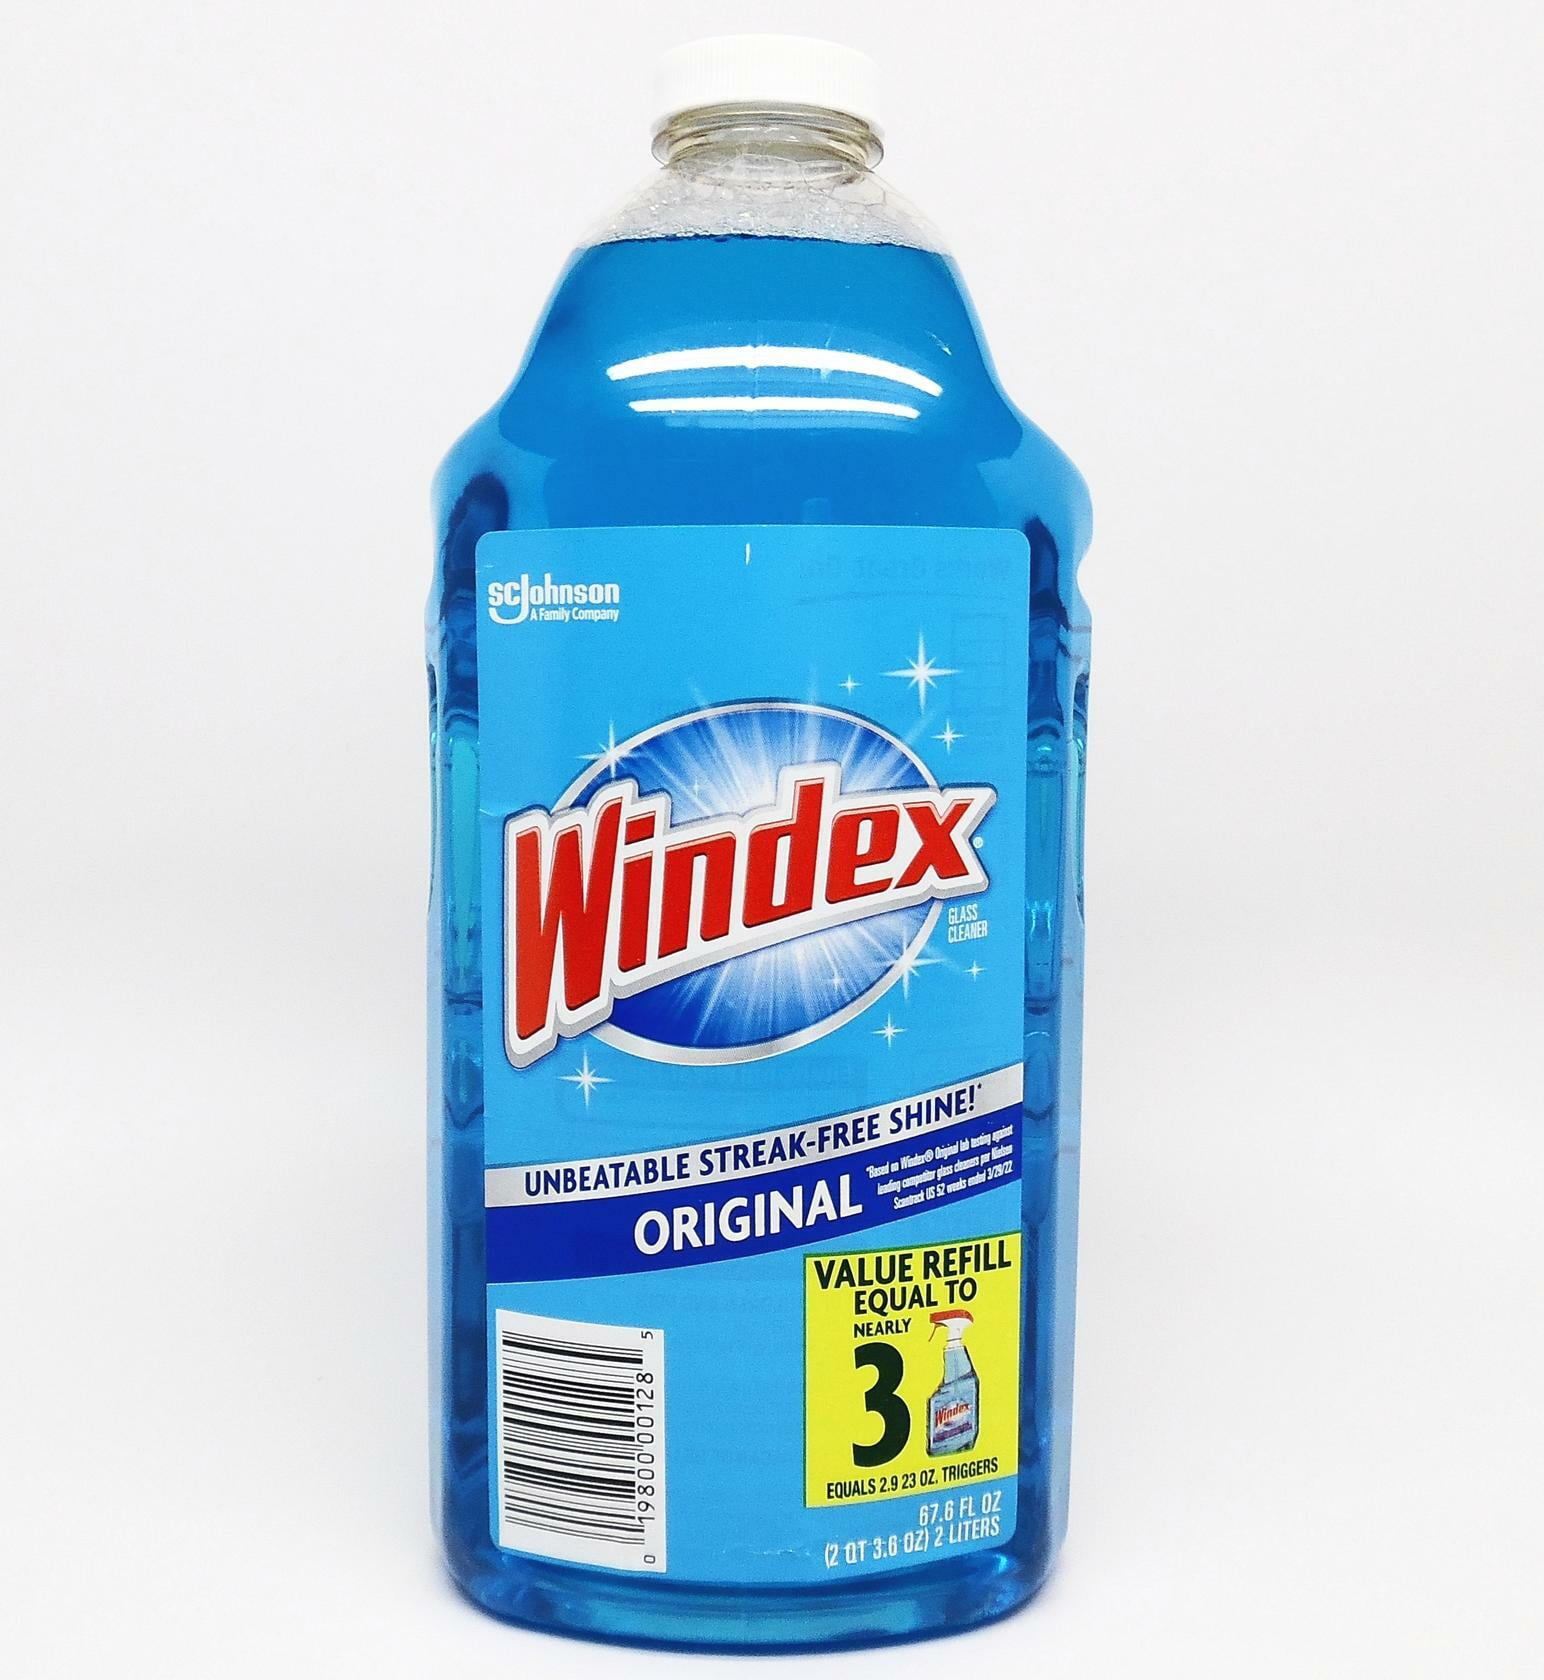 Awesome Windex Glass and Window Cleaner Spray Bottle, Bottle Made from 100% Recycled Plastic, Original Blue, 23 fl oz